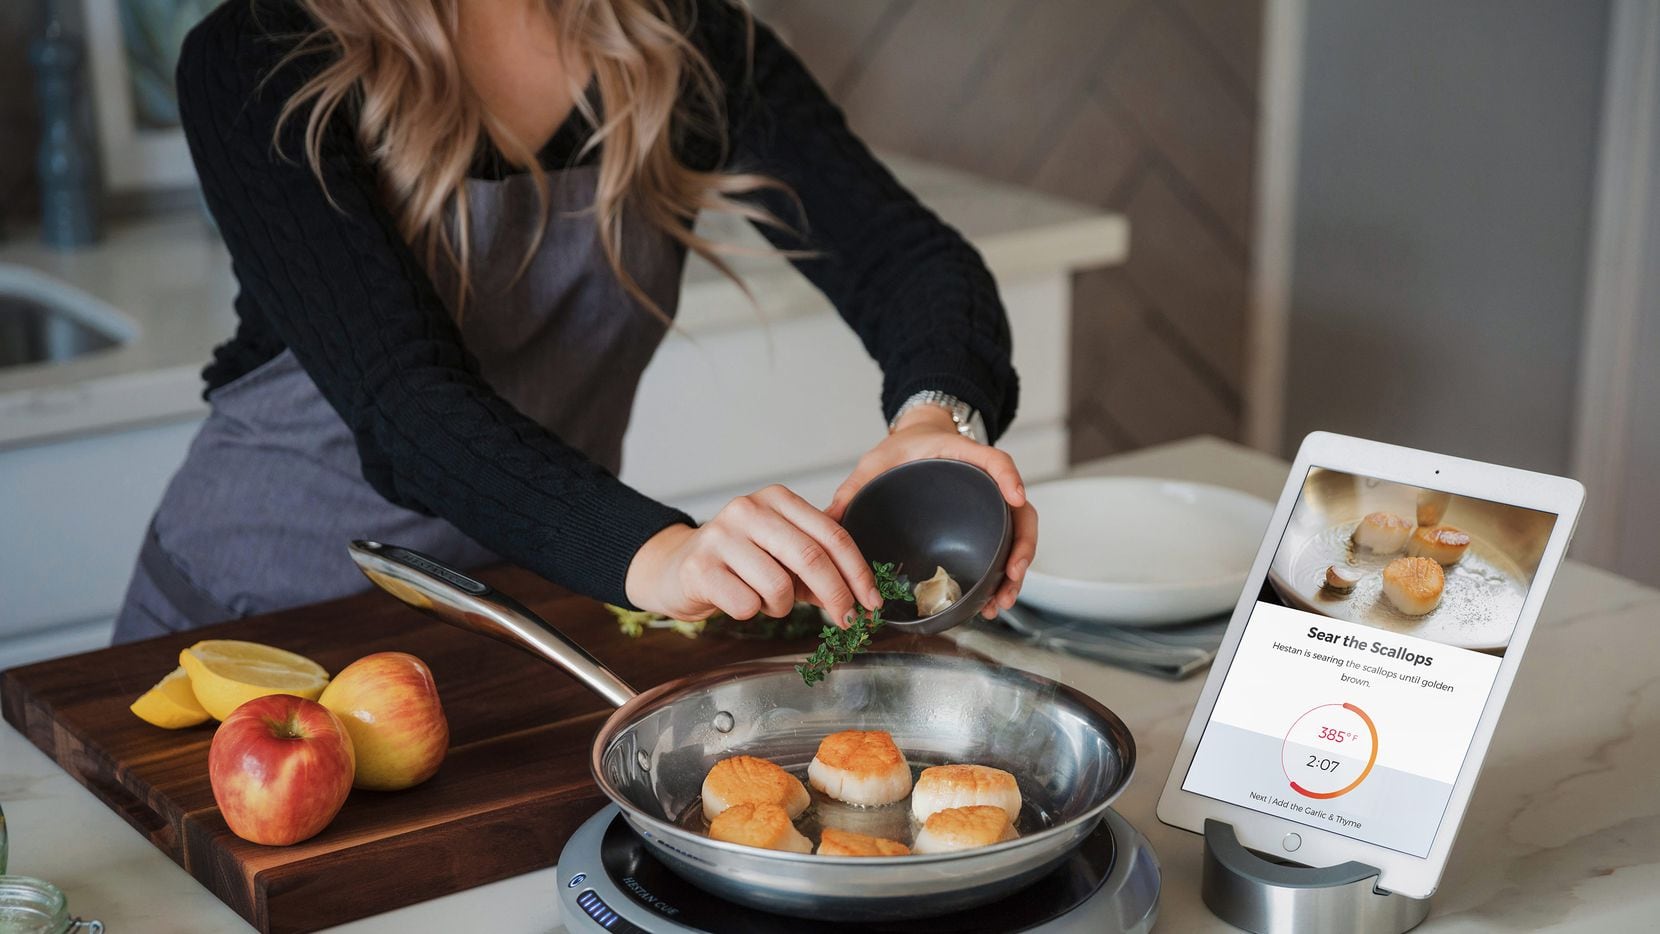 You'll want to keep your phone or tablet close by to help with controlling the cookware and...